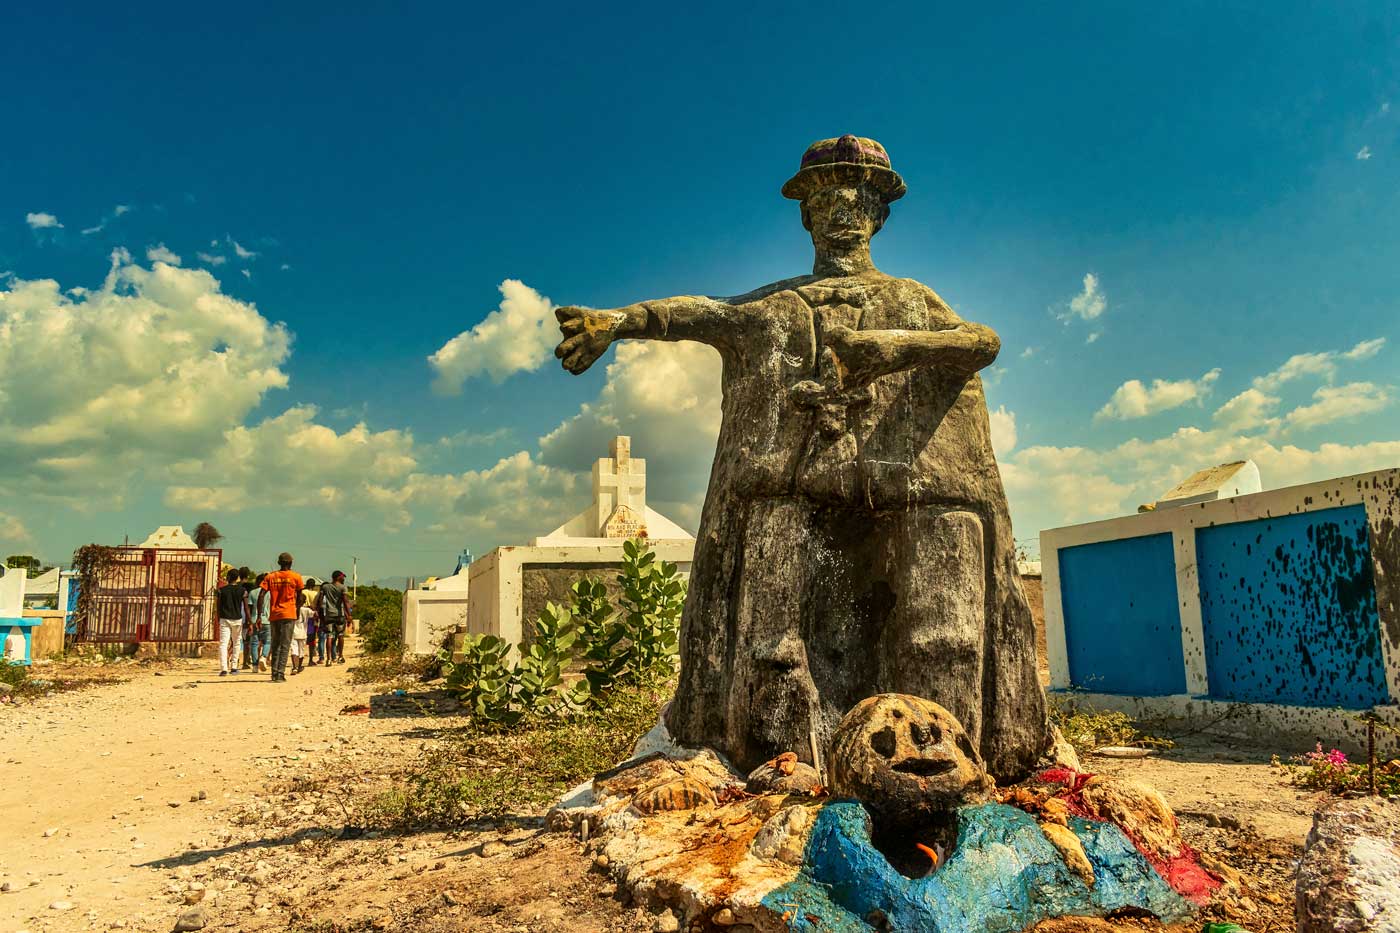 haitian cemetery with sculpture and blue sky with clouds